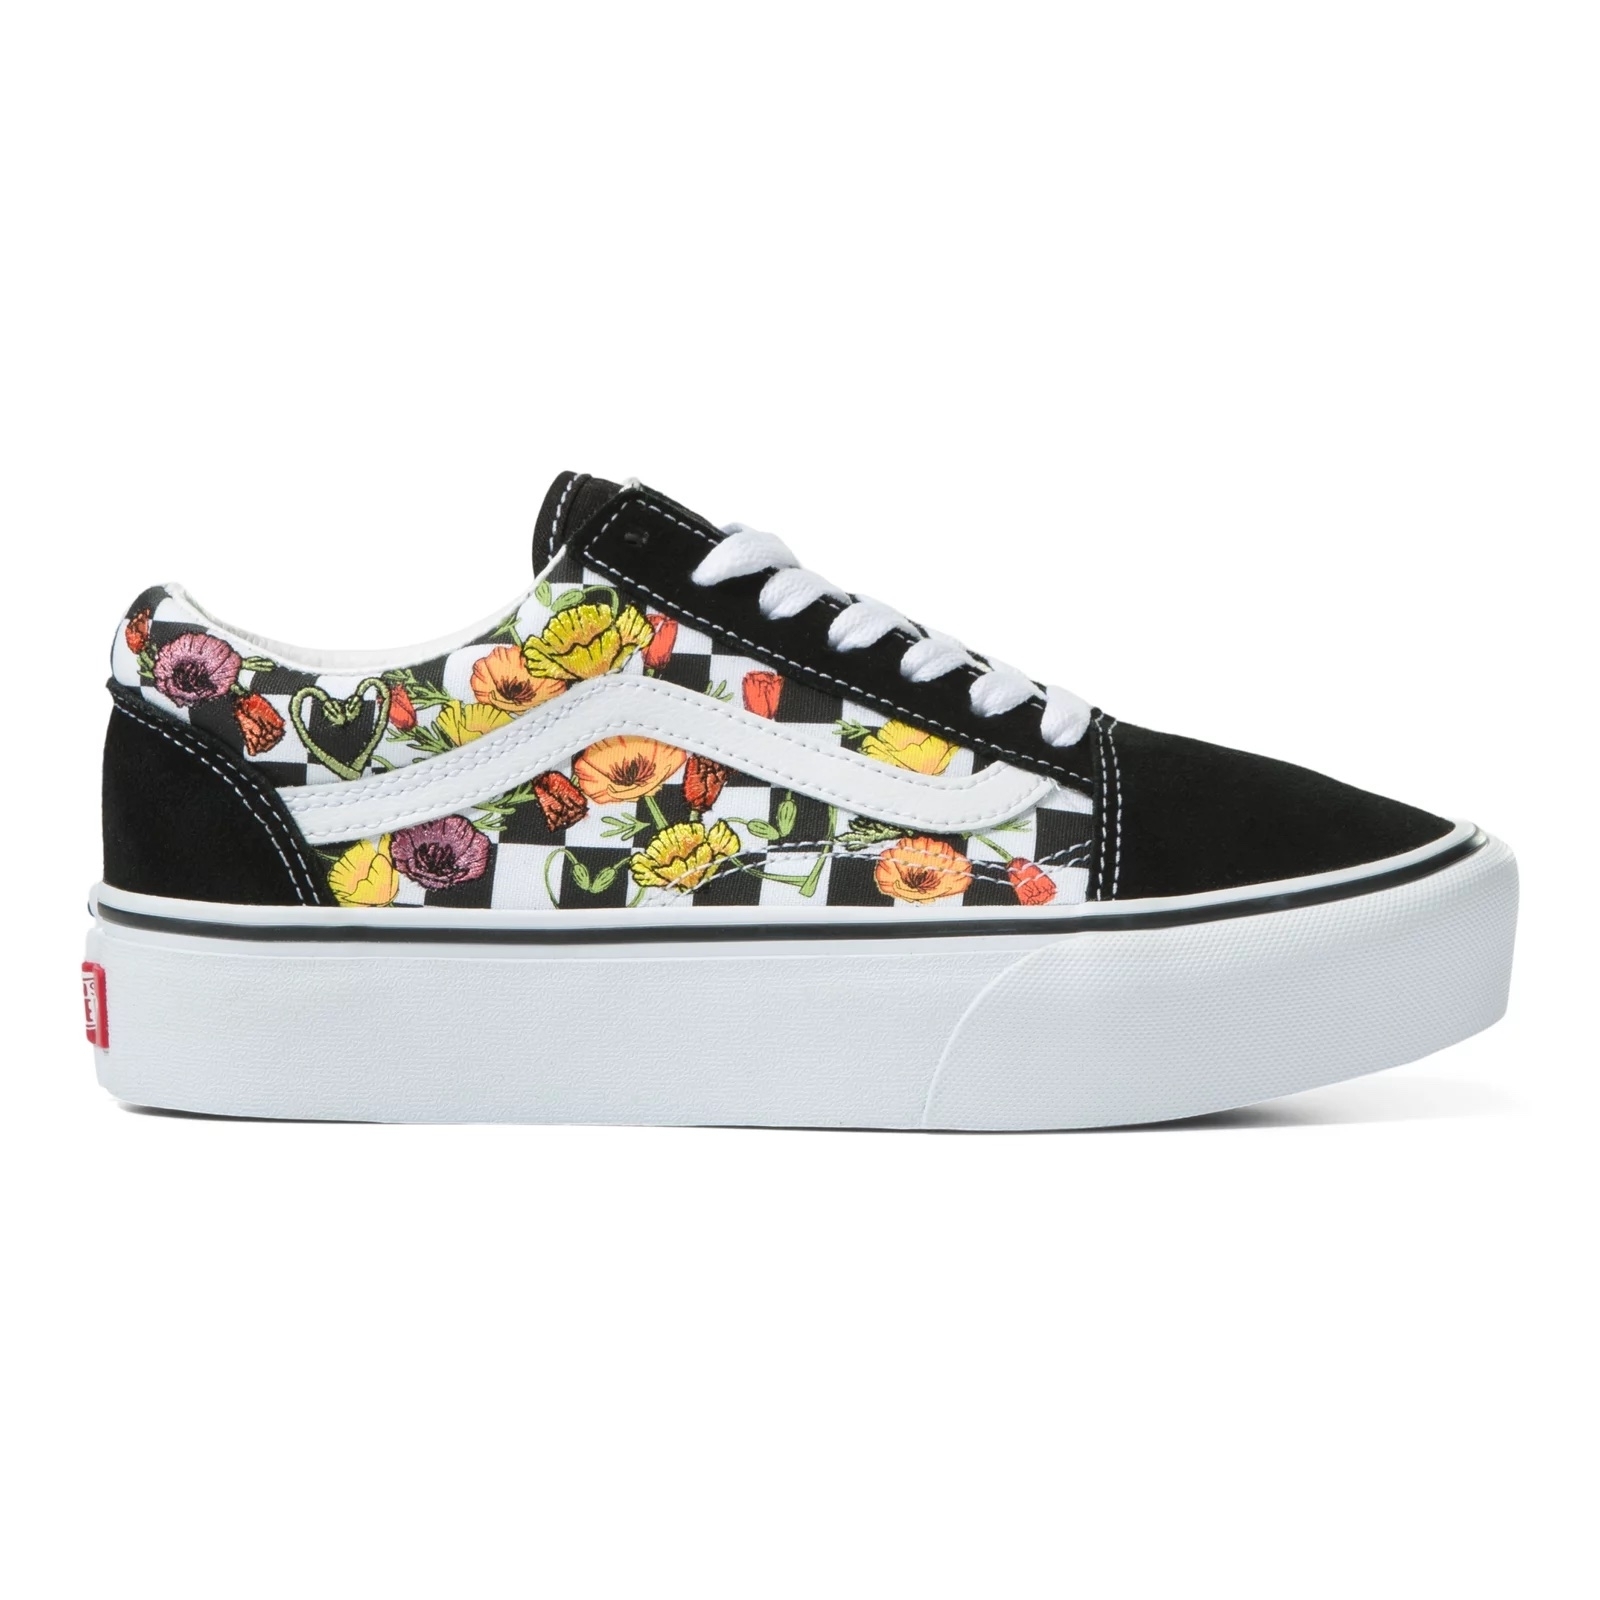 Hearty Antipoison present day Vans Old Skool Platform (Poppy Checkerboard Black/Multi) Women's Shoes  Casual Shoes at Switch Skateboarding